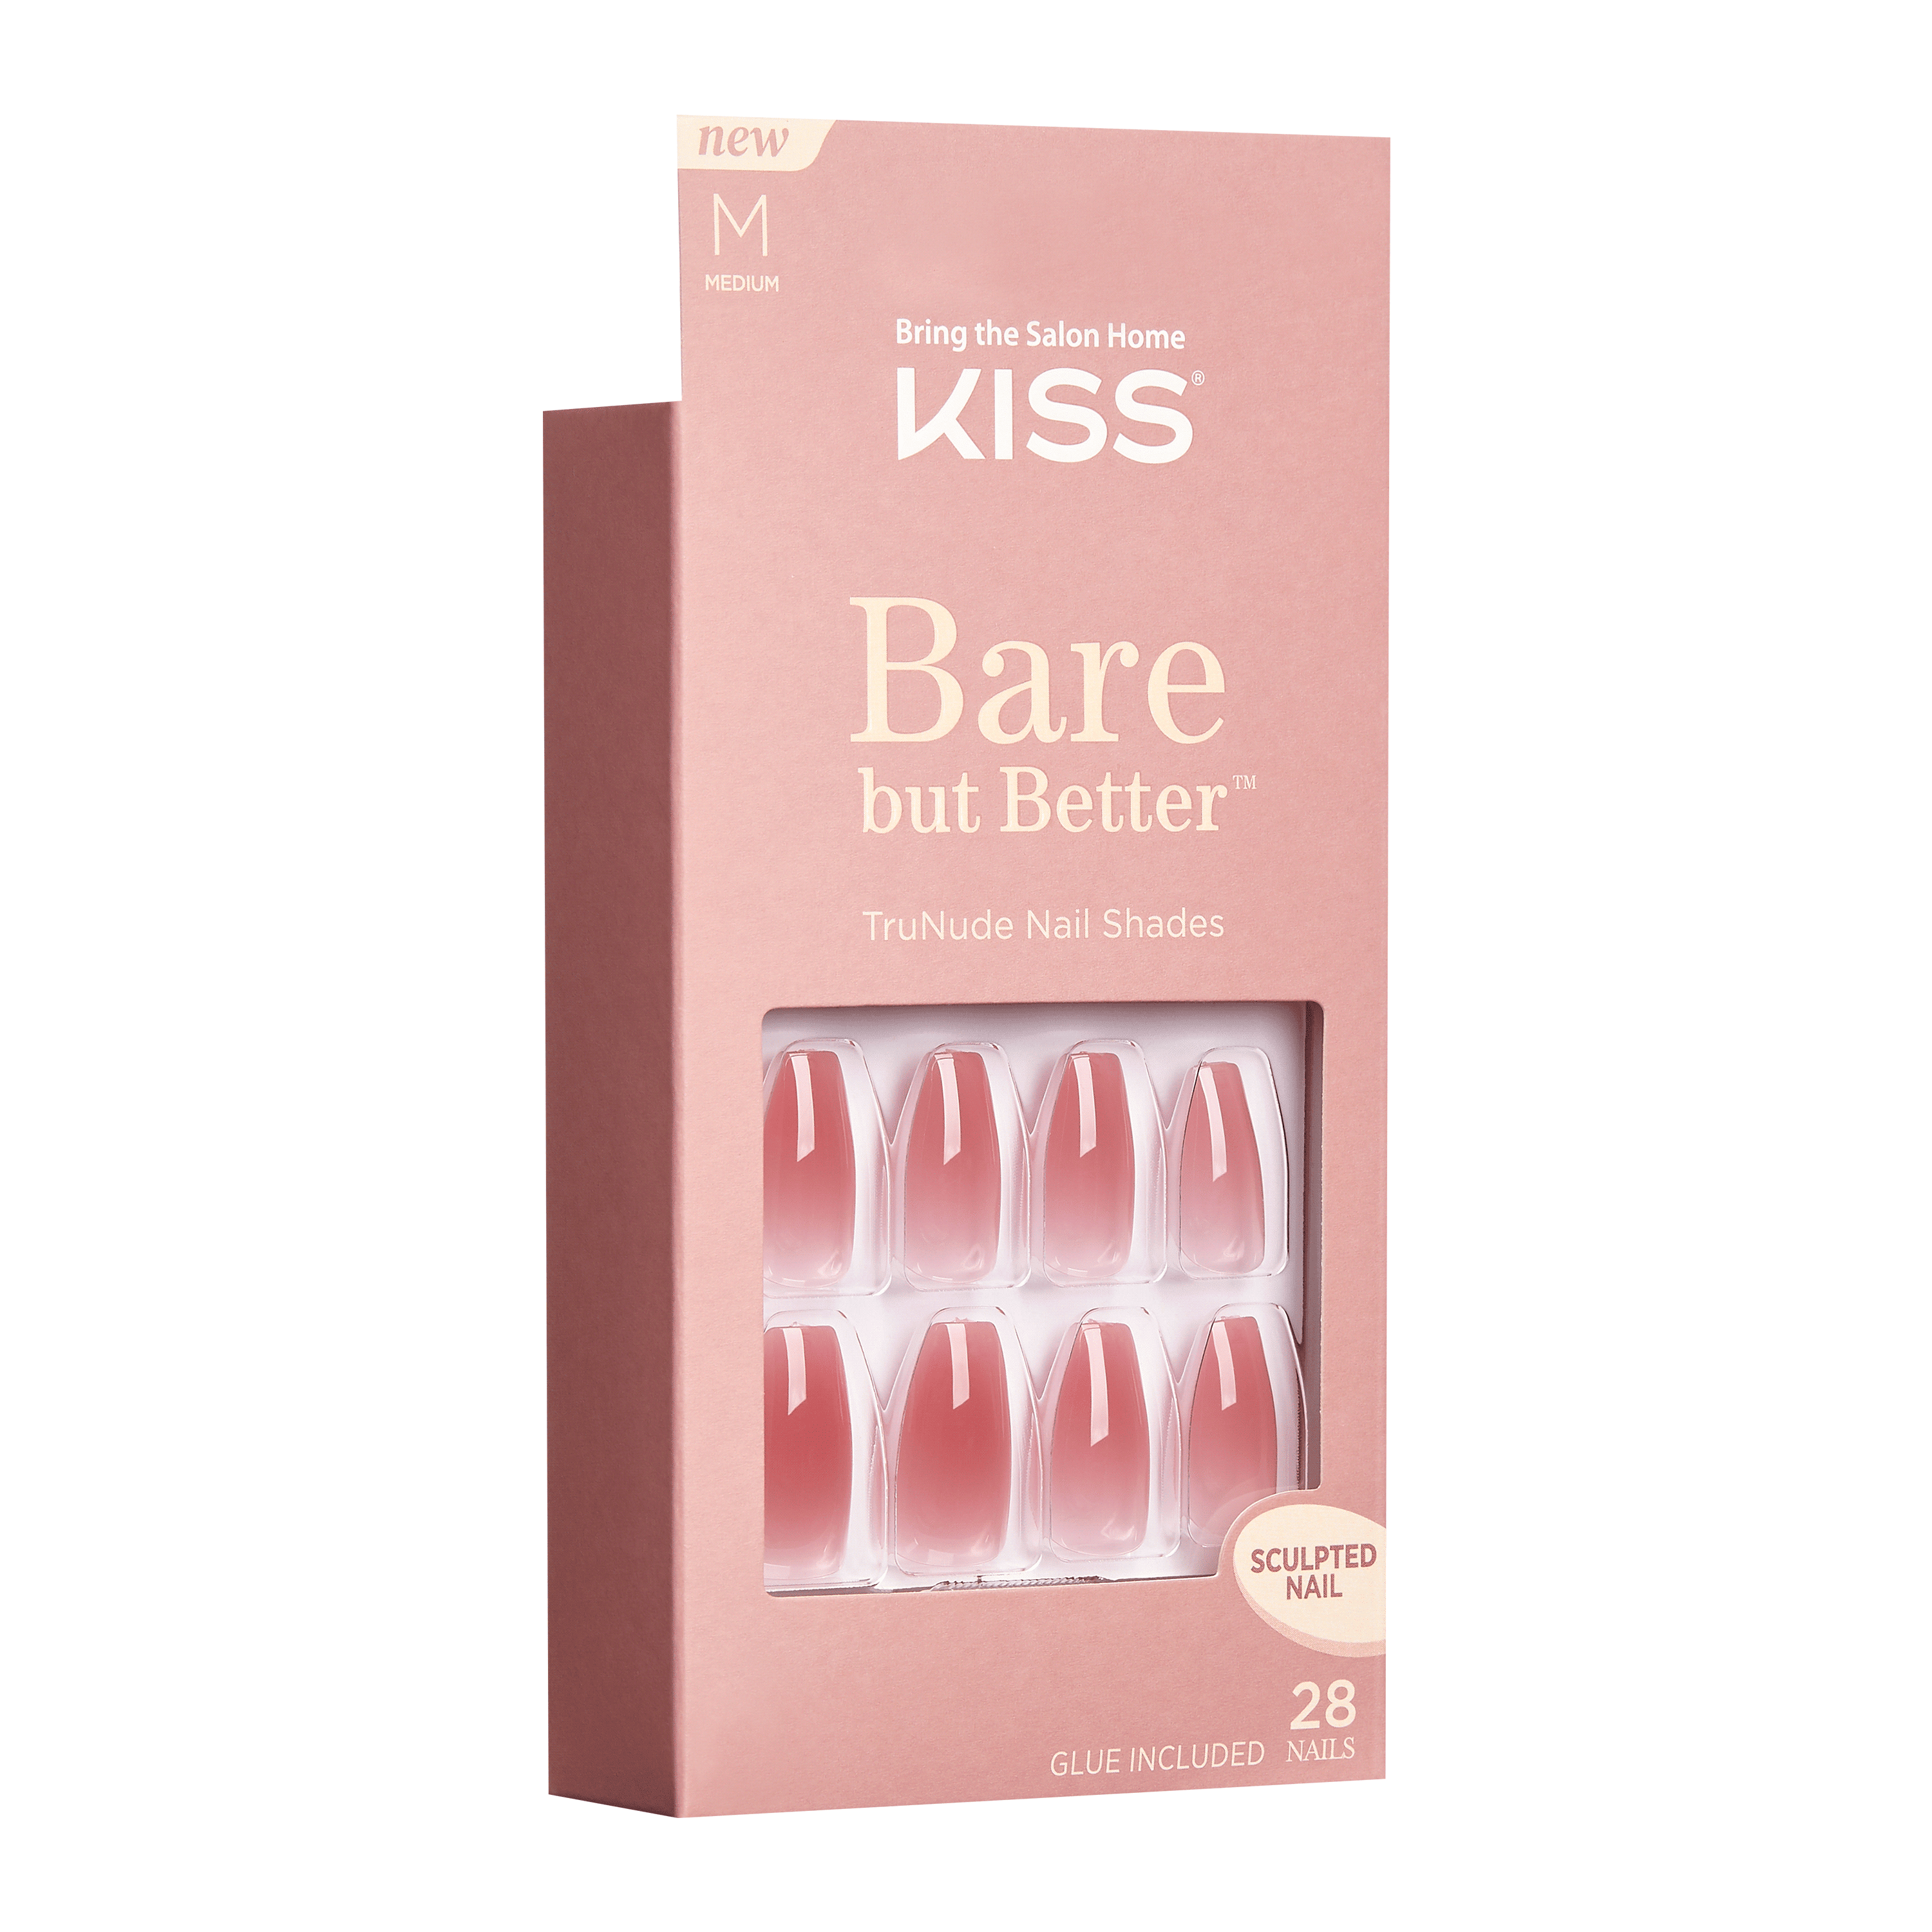 Kiss Masterpiece Luxe Manicure Fake Nails - Extravagant - 30ct Multicolor -  Price in India, Buy Kiss Masterpiece Luxe Manicure Fake Nails - Extravagant  - 30ct Multicolor Online In India, Reviews, Ratings & Features |  Flipkart.com